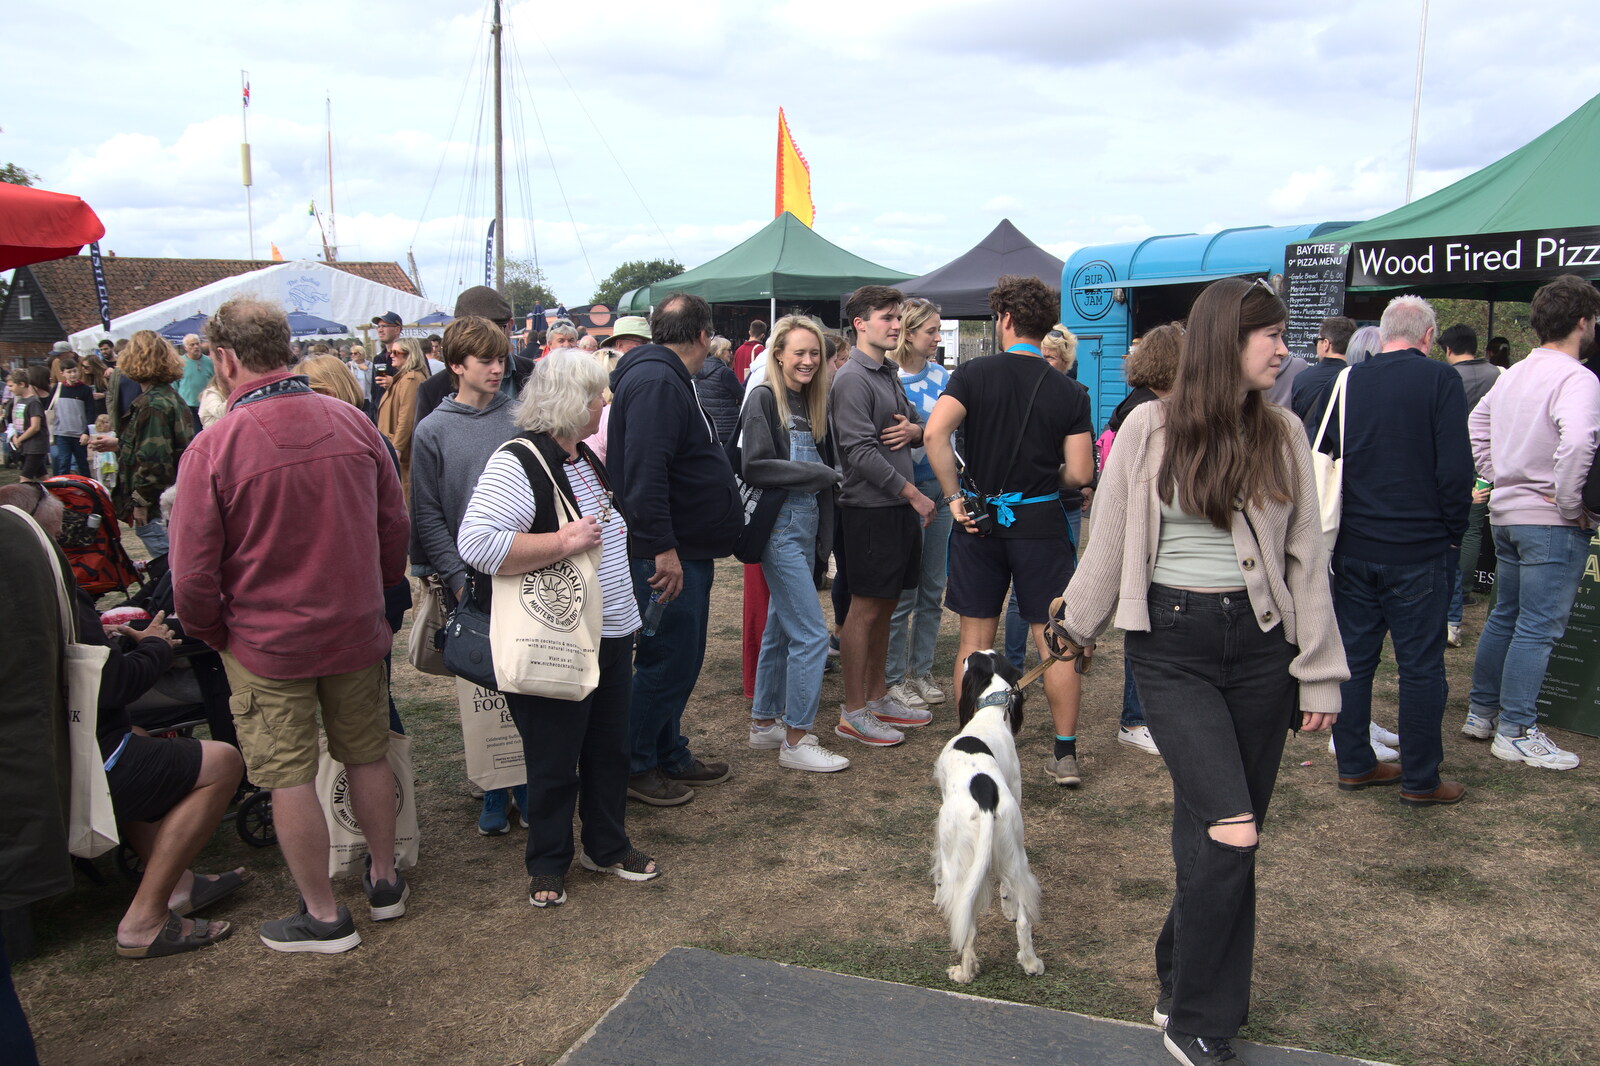 There are several queues for the food vans from The Aldeburgh Food Festival, Snape Maltings, Suffolk - 25th September 2022